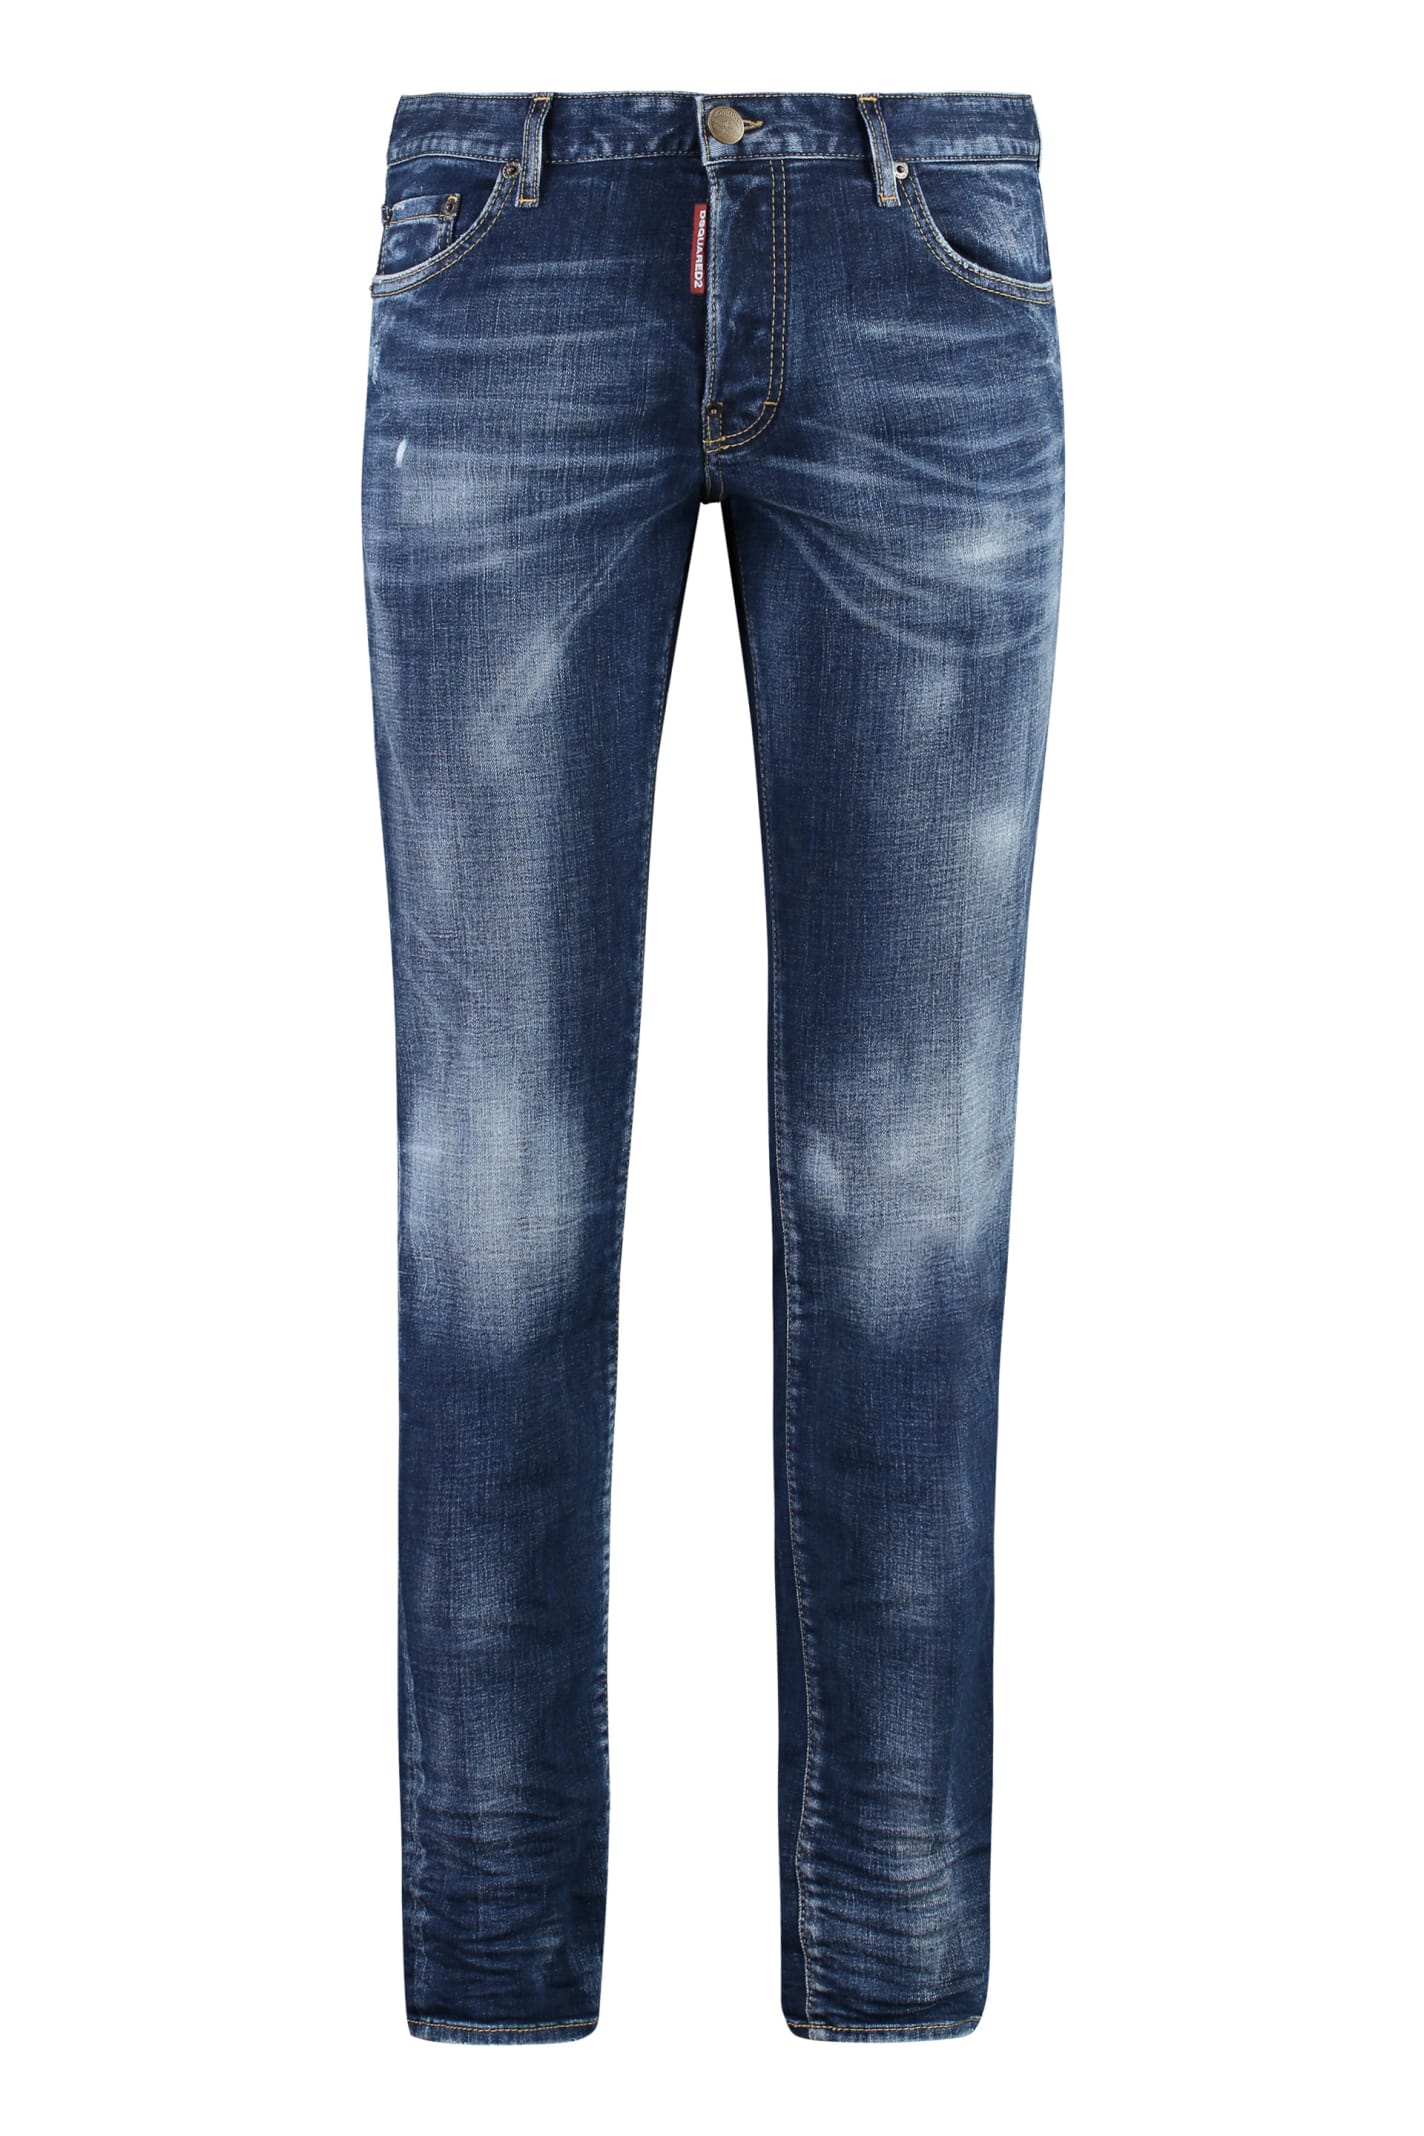 Shop Dsquared2 Stretch Cotton Jeans In Navy Blue